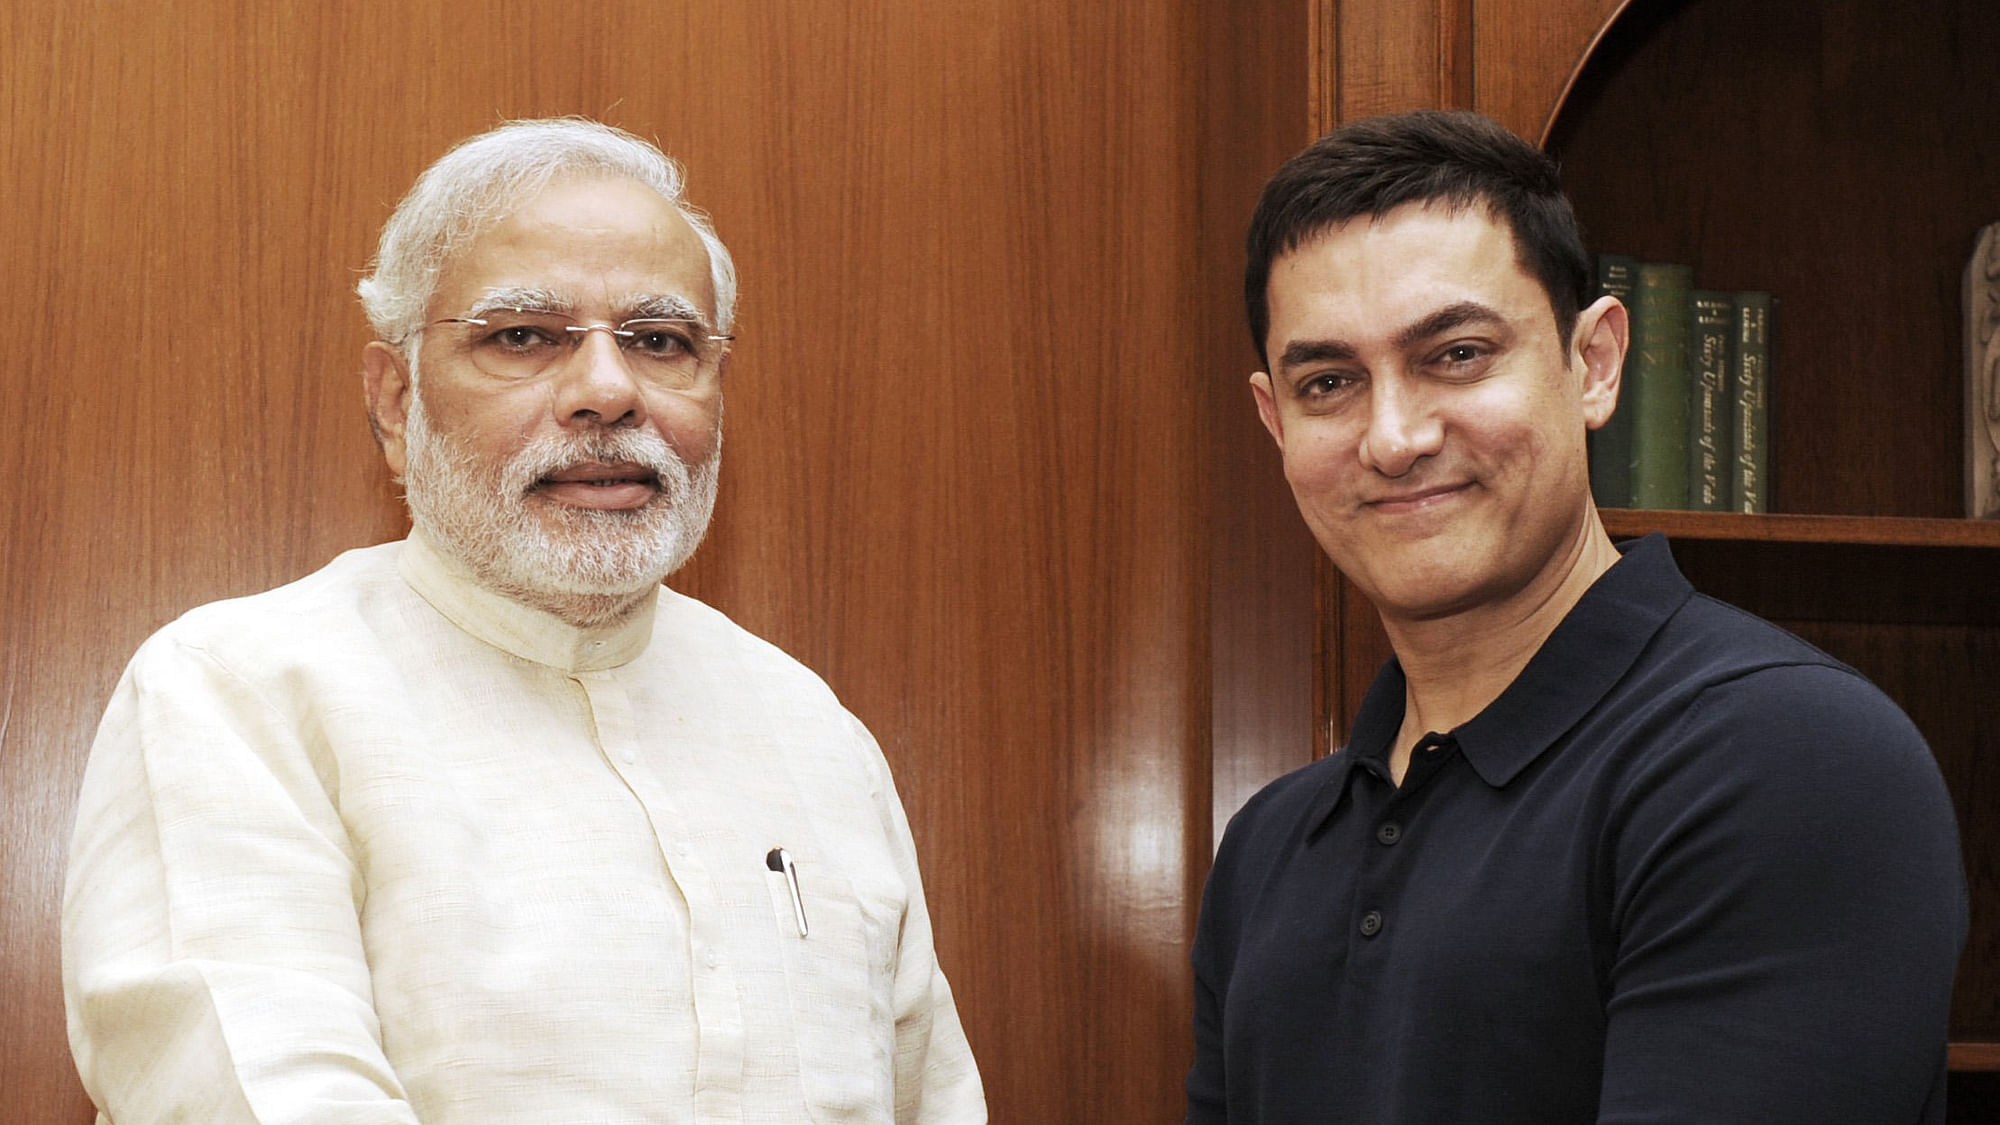 Aamir Khan and Kangana Ranaut meet PM Modi for dinner during the Make In India event being held in Mumbai (Photo: Twitter/<a href="https://twitter.com/indiflip">@indiflip</a>)